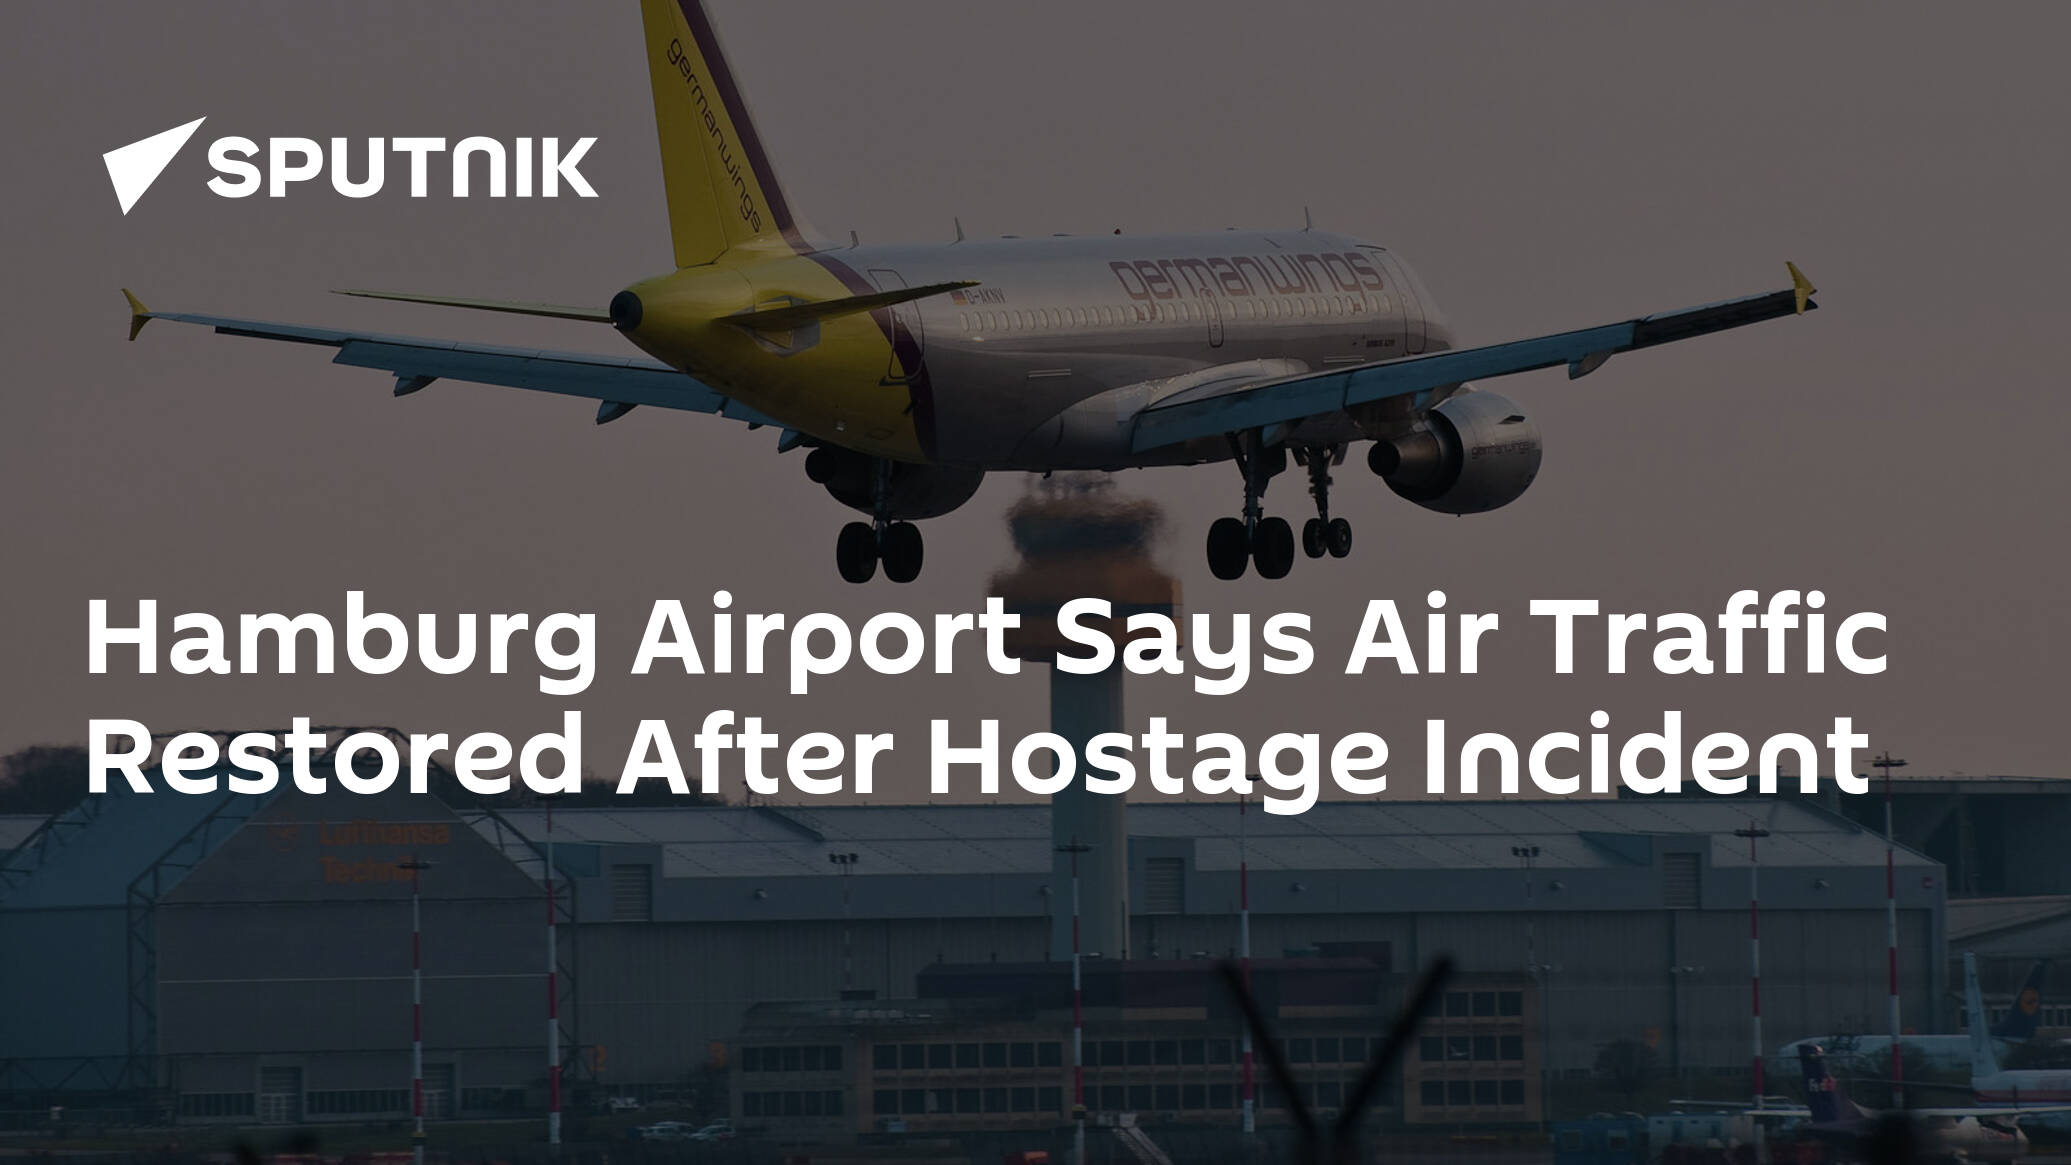 Hamburg Airport Says Air Traffic Restored After Hostage Incident